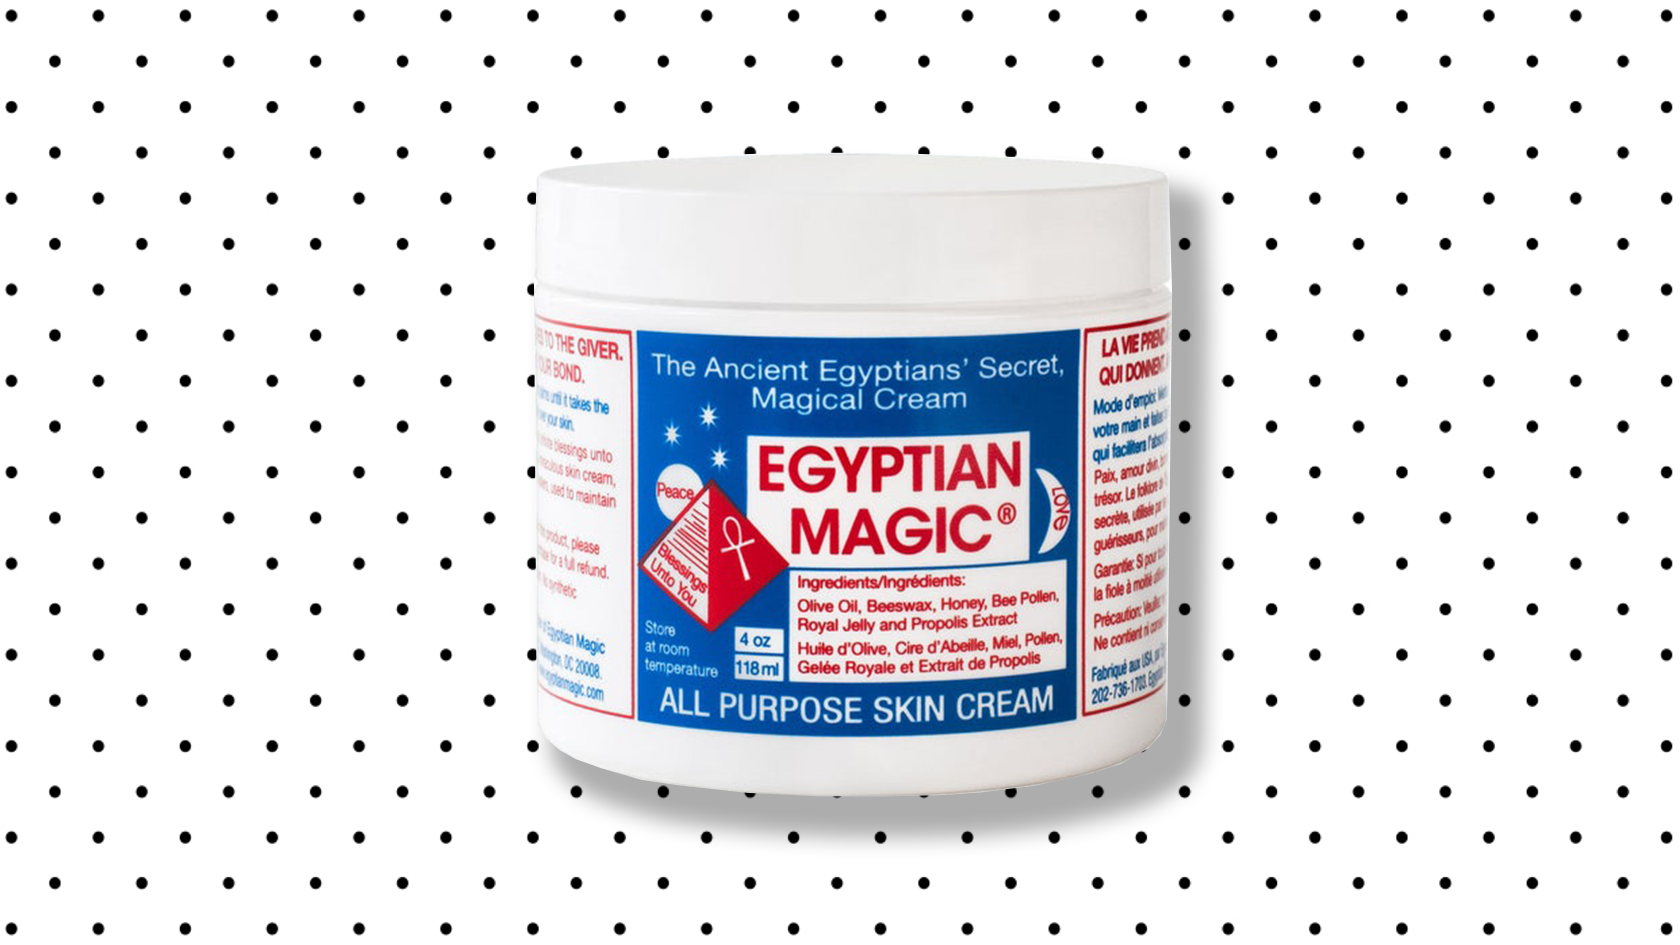 Egyptian Magic Cream review - How to use it